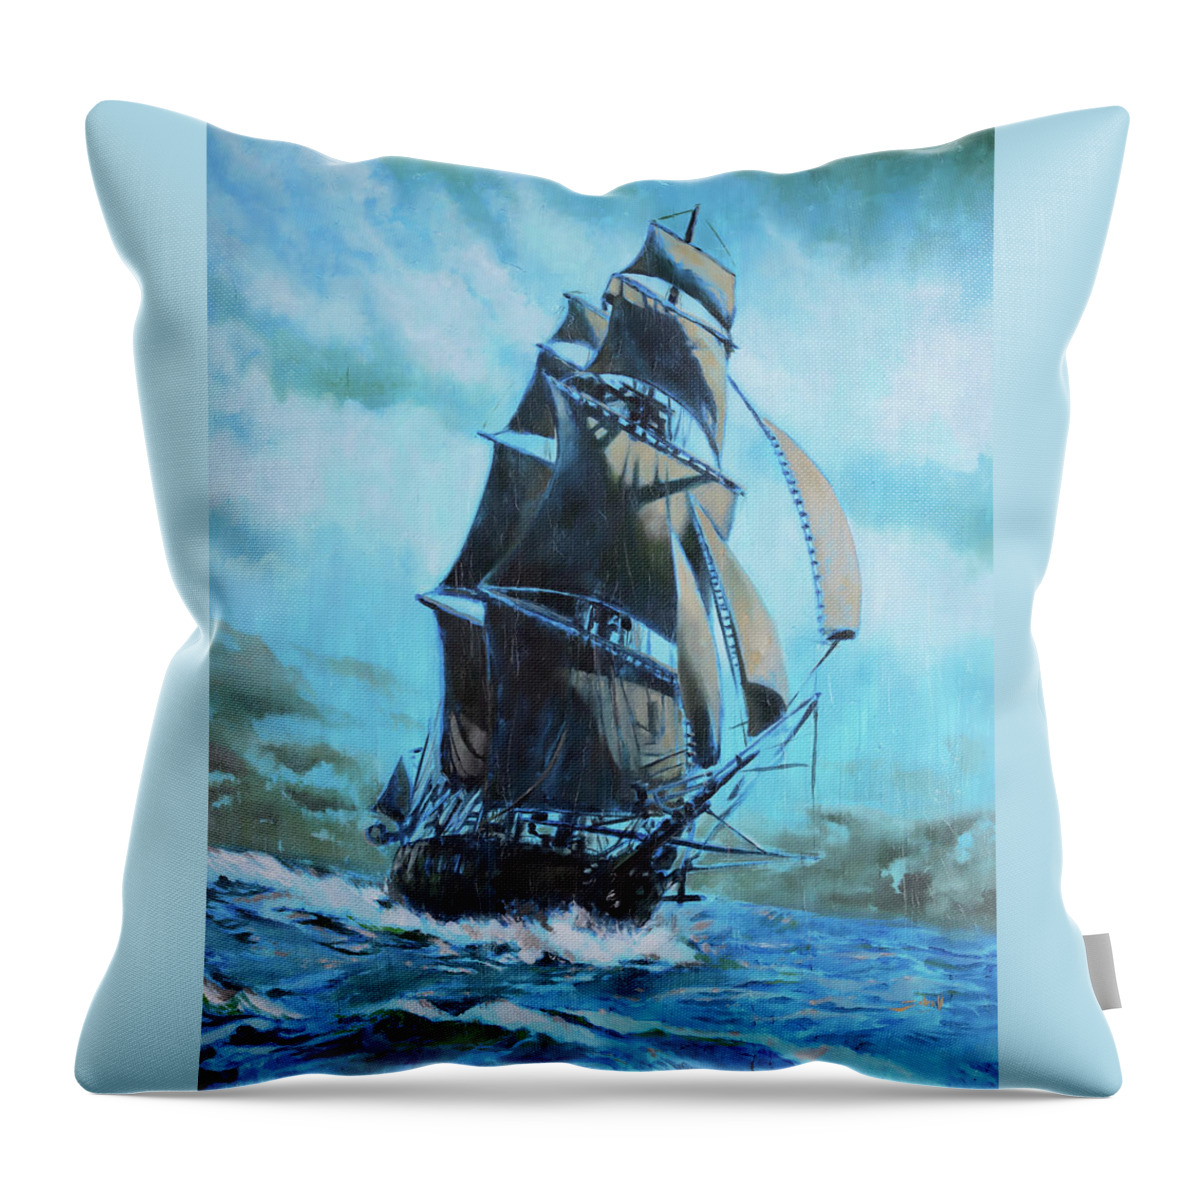 Saiboat Throw Pillow featuring the painting Around The World by Sv Bell